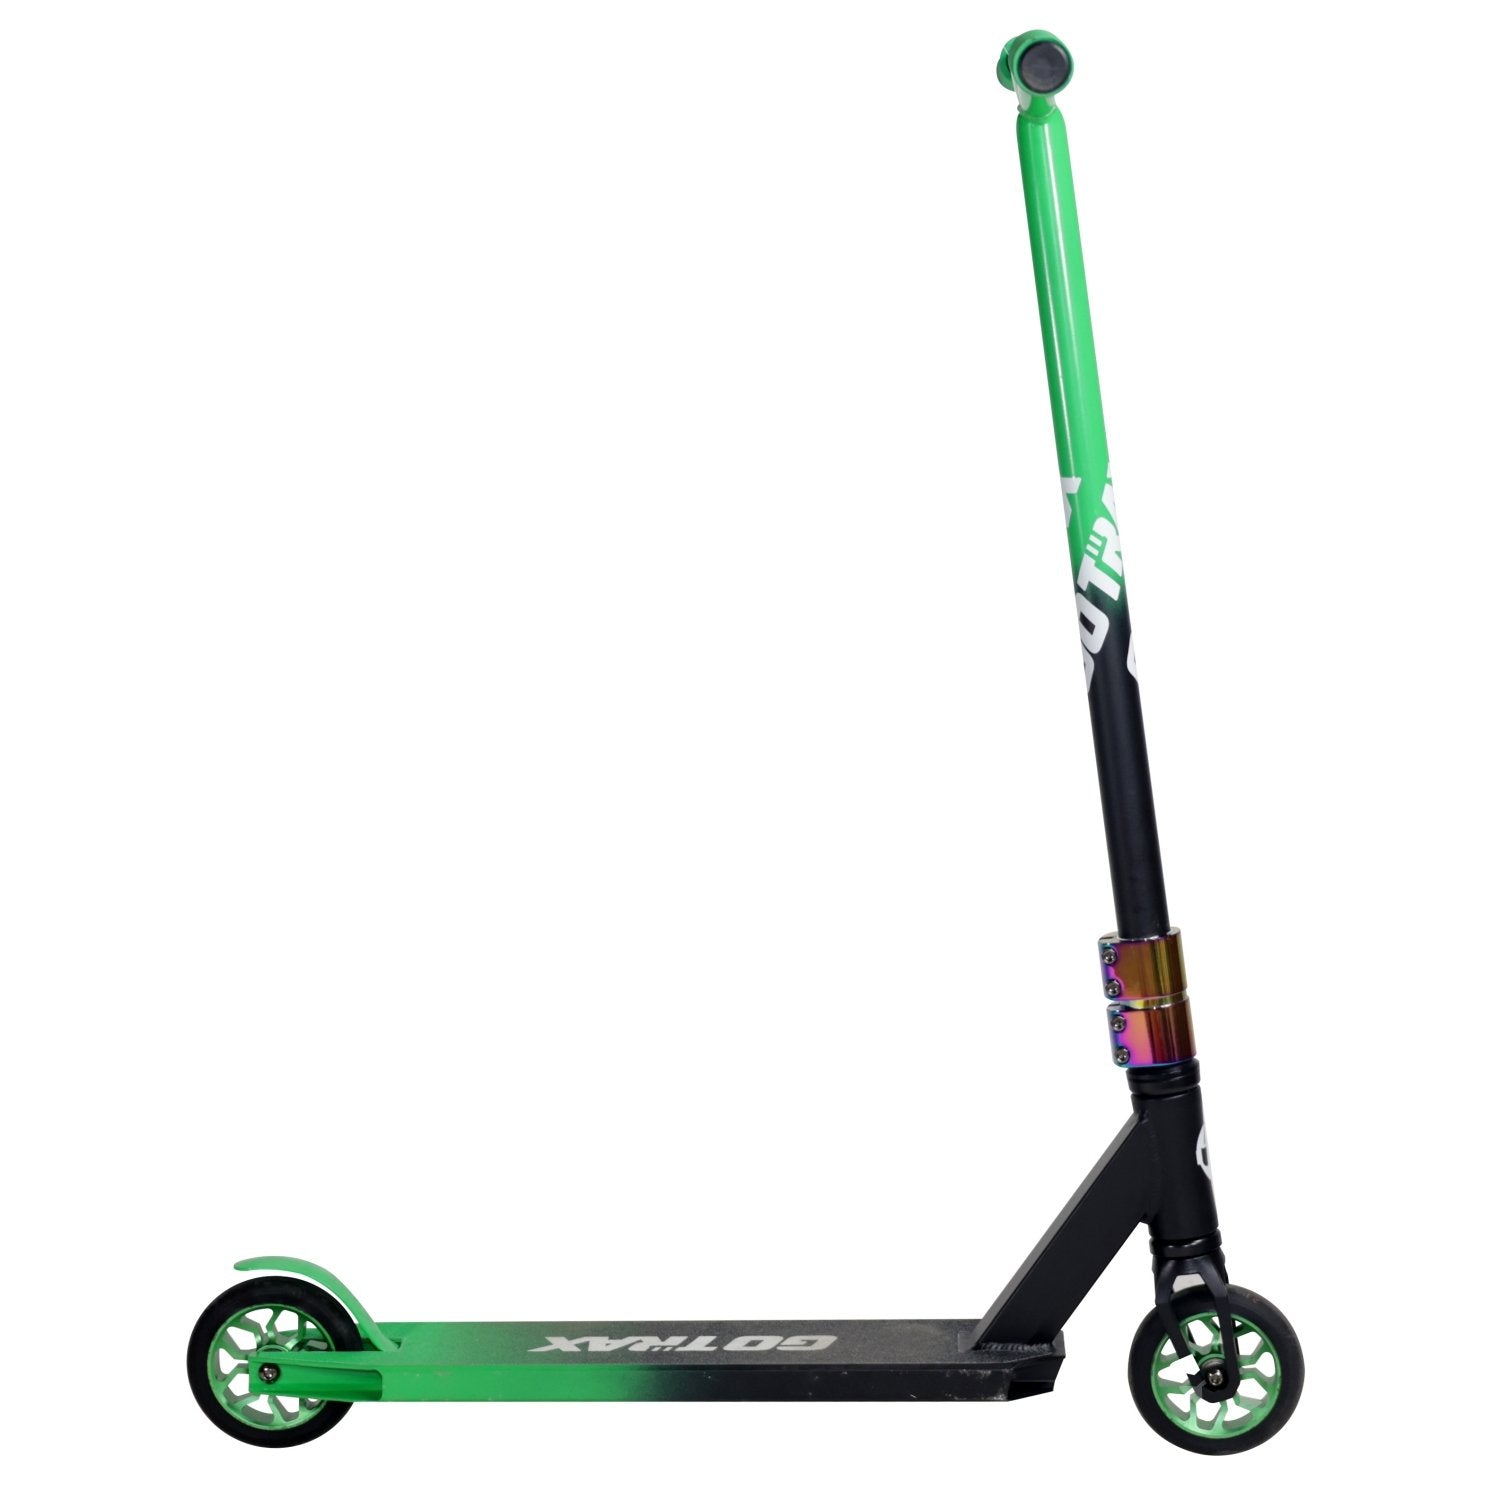 Gotrax ST Pro 200 Style Stunt Scooter with pro design Plus HIC Compression 4.3"-220lbs Max